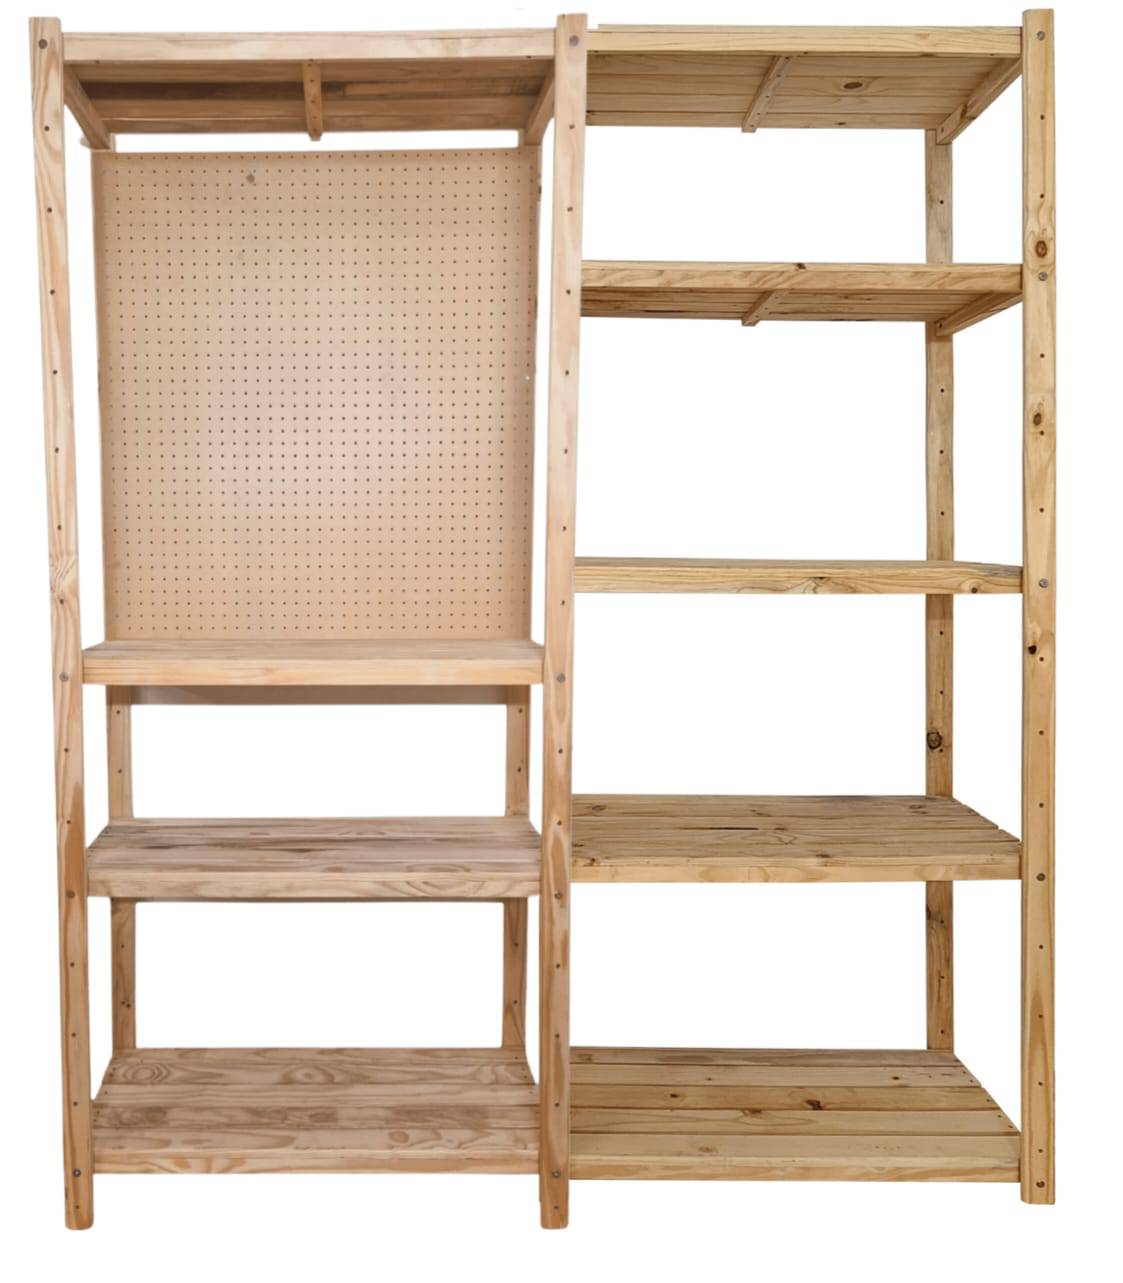 Double Bay Tool Station DIY Wooden Shelf with 5 levels of Shelving (2.1m) - Garage Guys